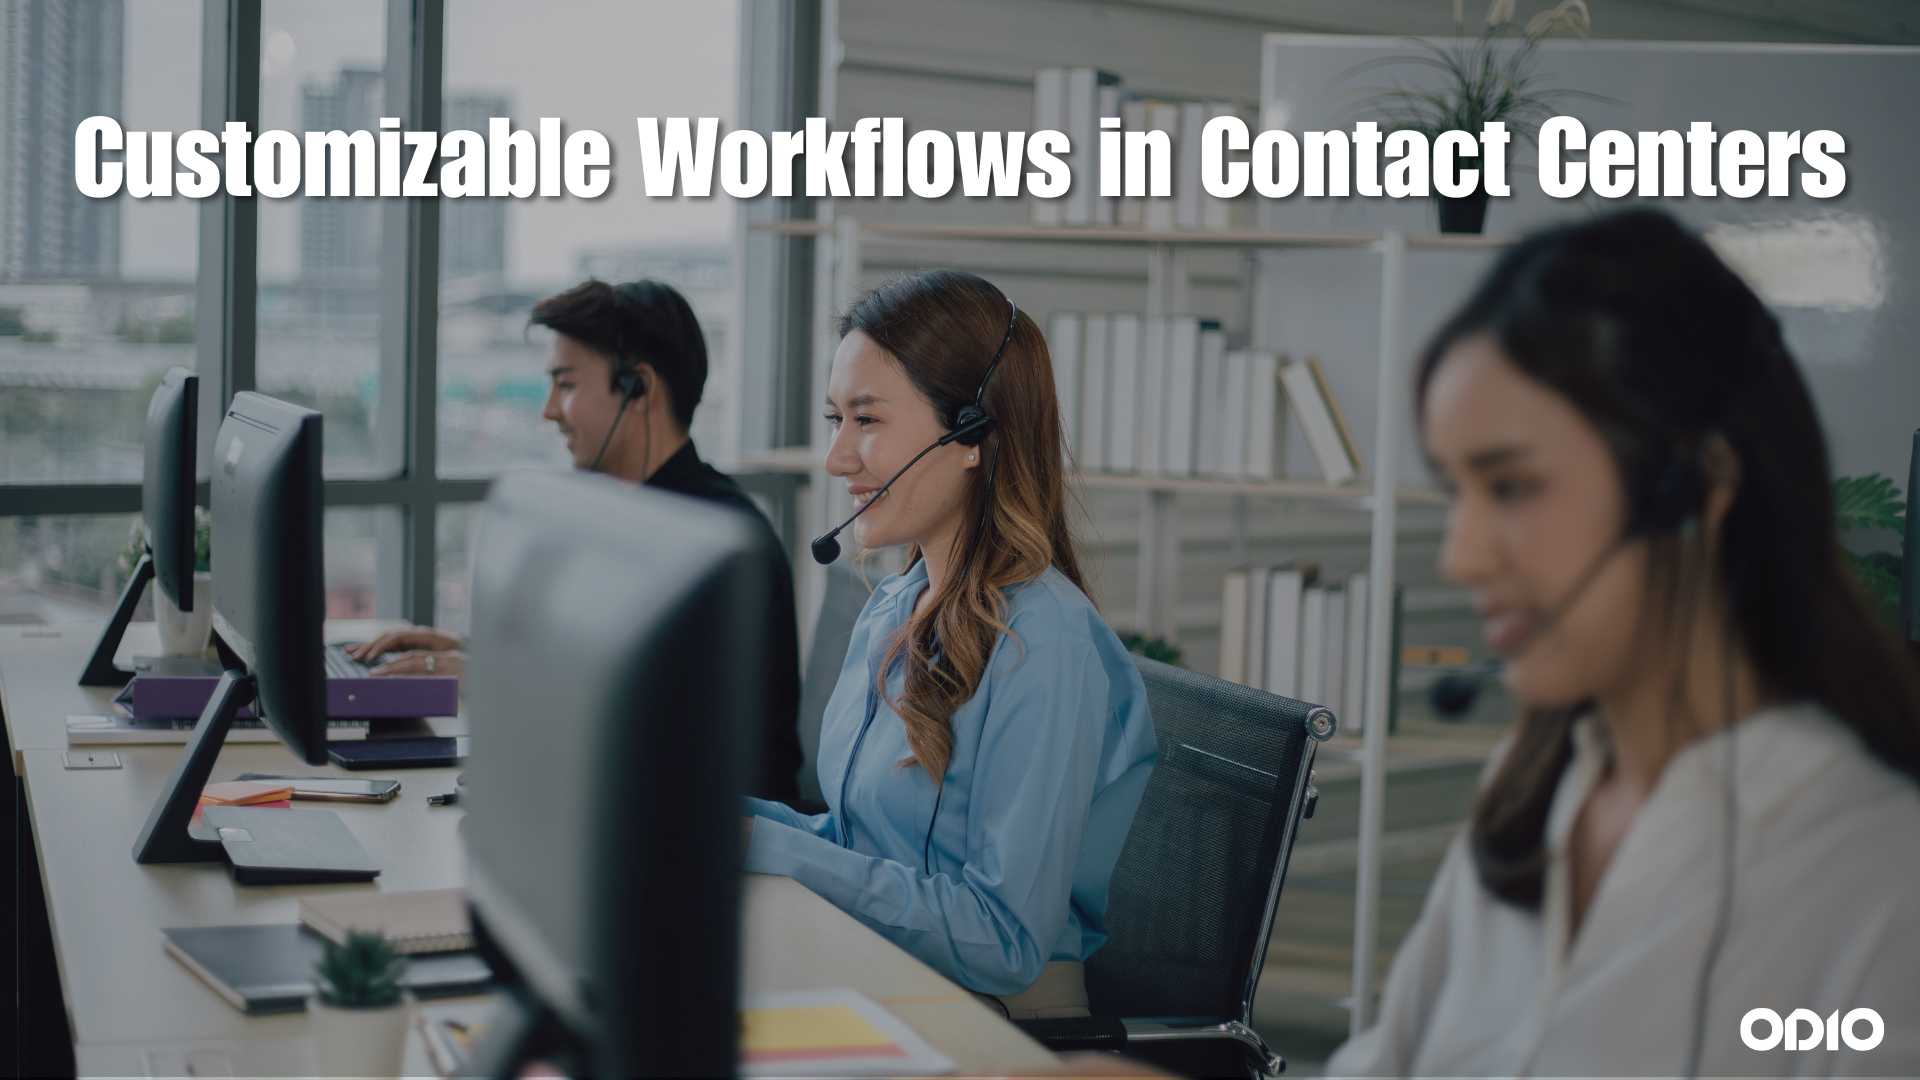 Image showing happy contact center agents as the workflows are customizable.